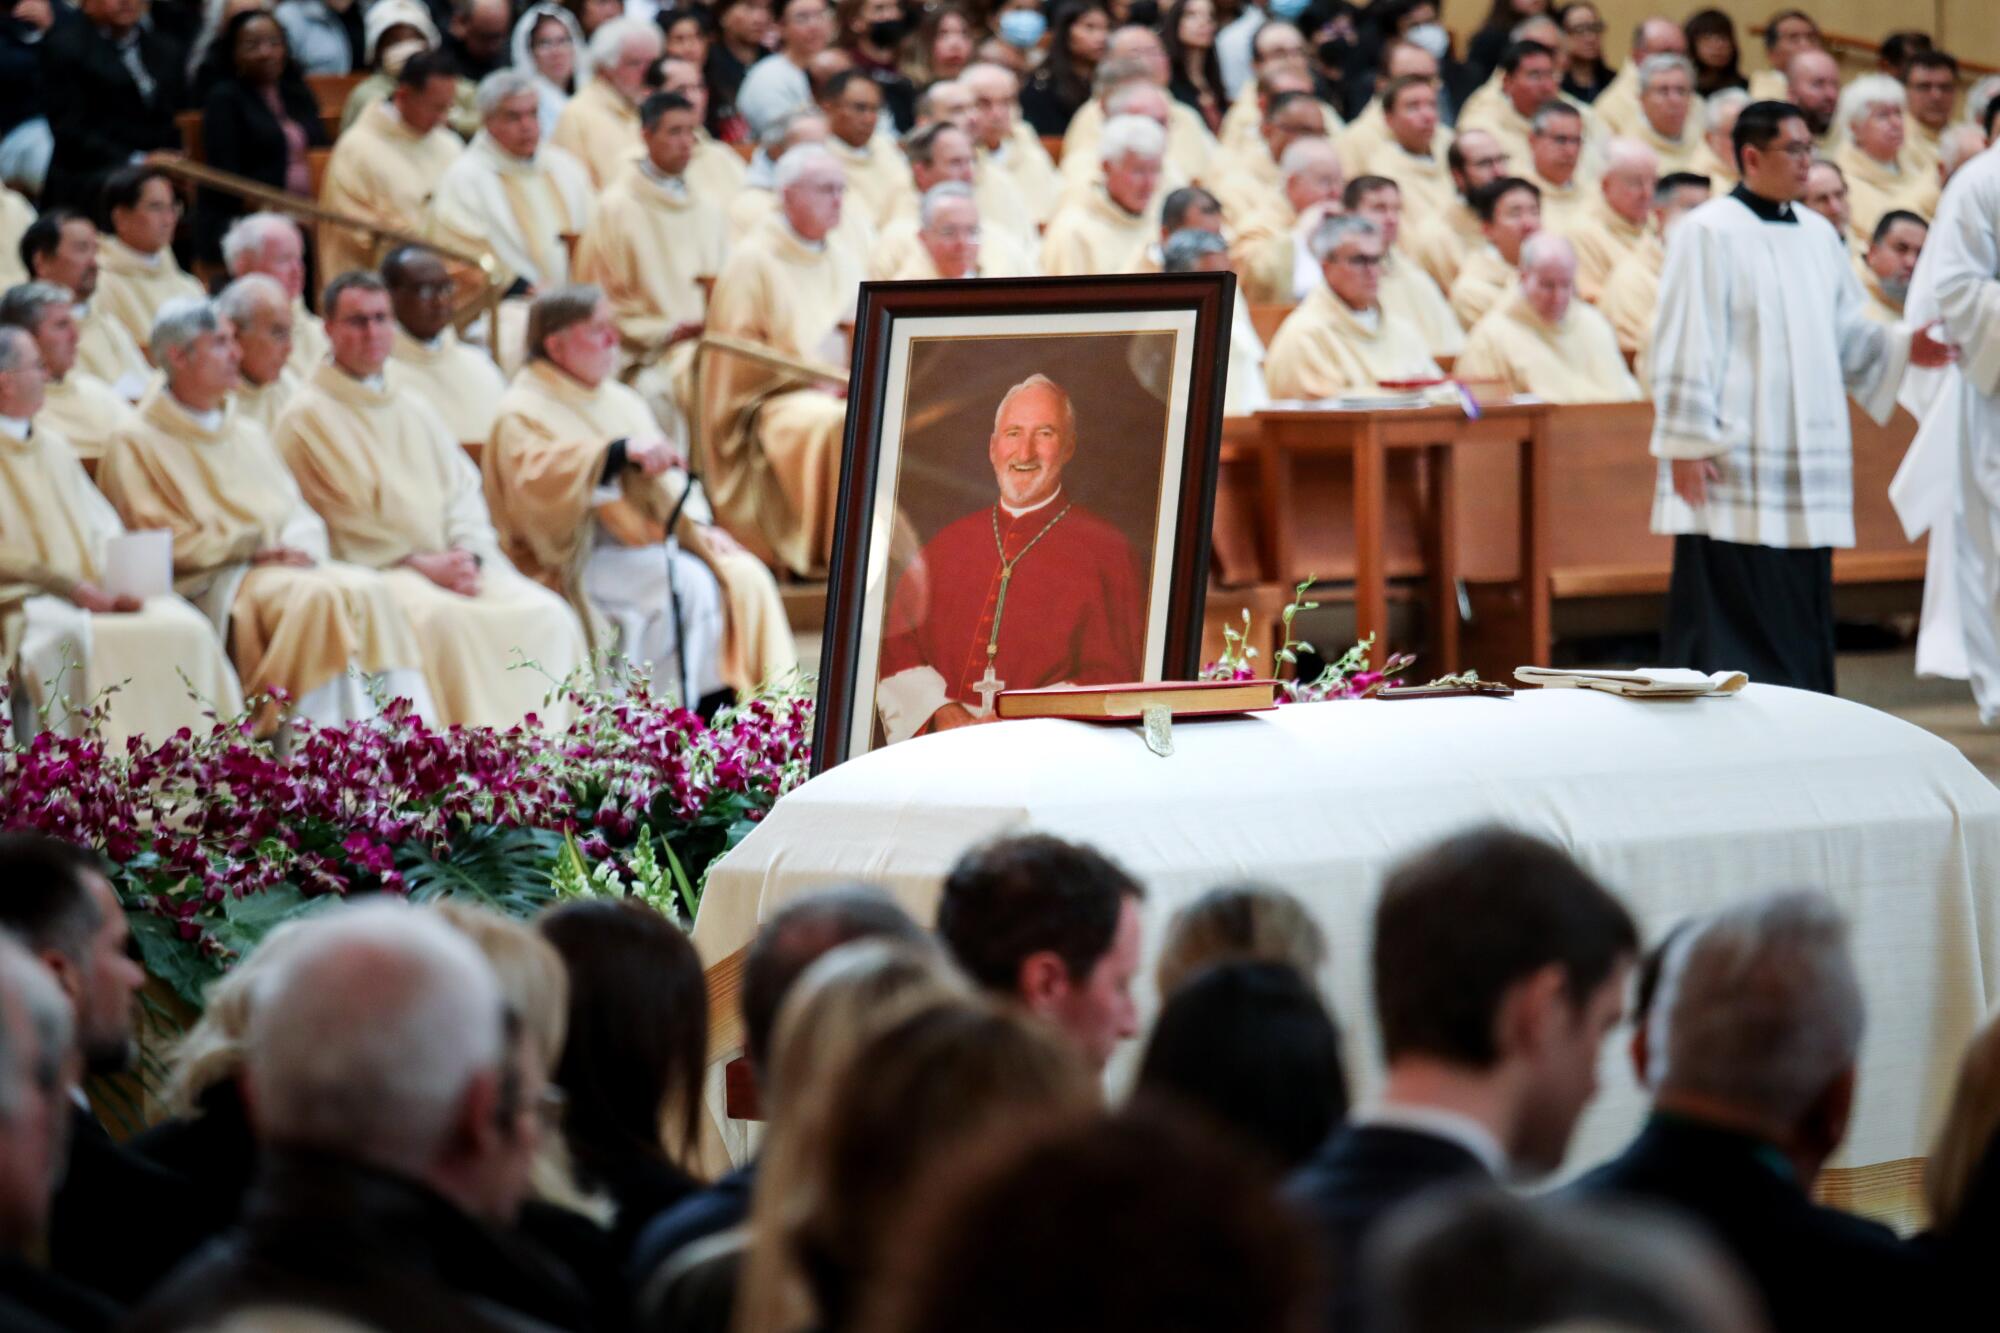 A photo of Bishop O'Connell is displayed on his coffin at his funeral Mass on Friday.